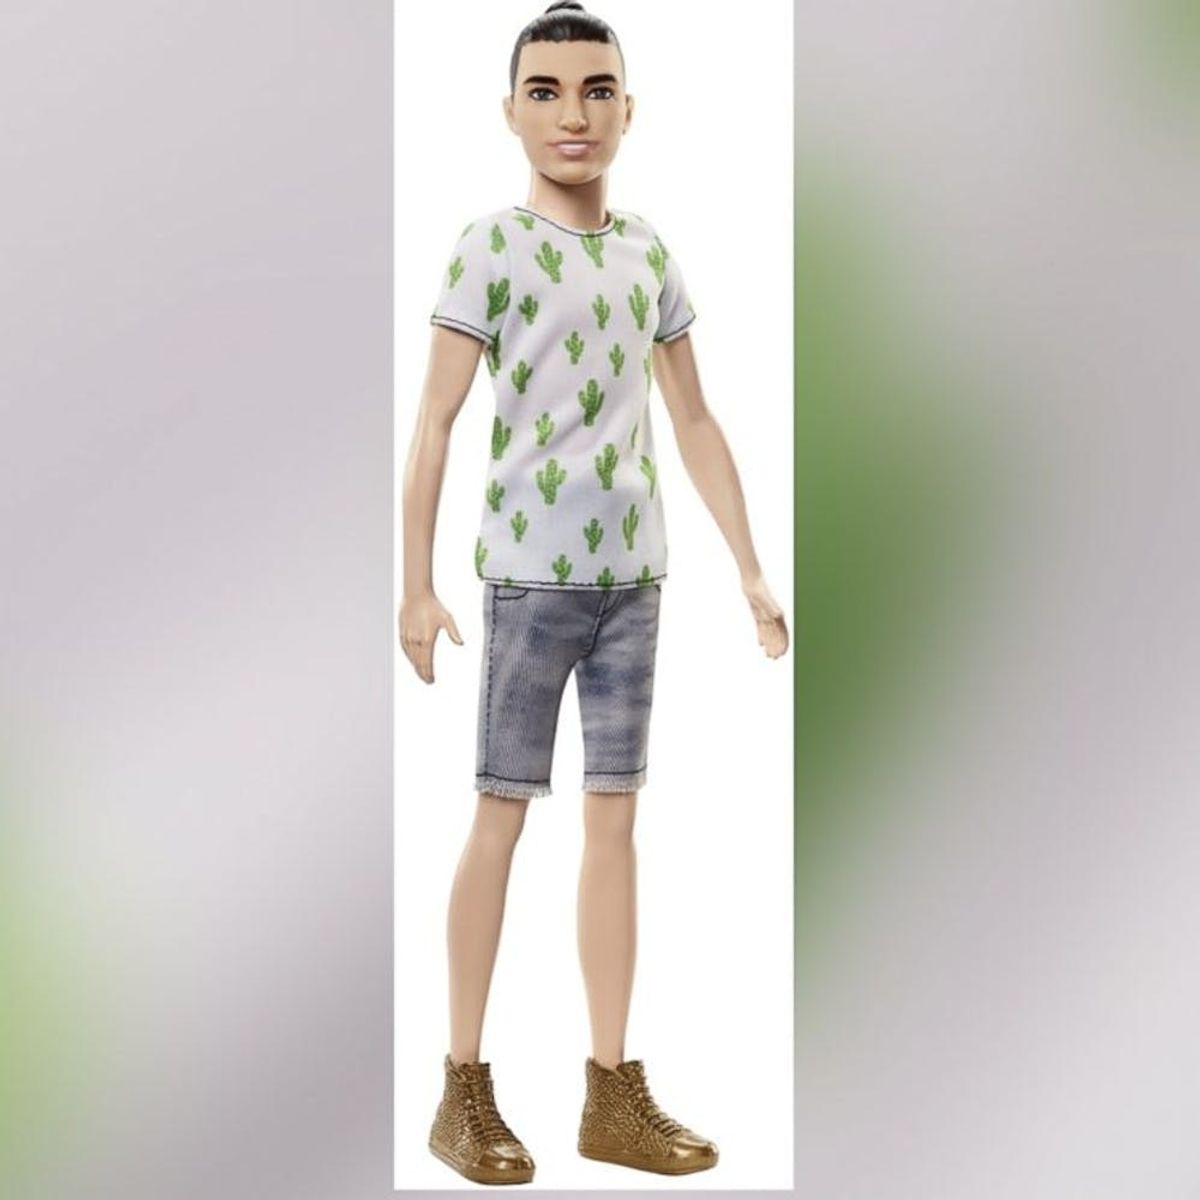 Inclusive Barbie Now Has a Diverse Ken Doll to Match